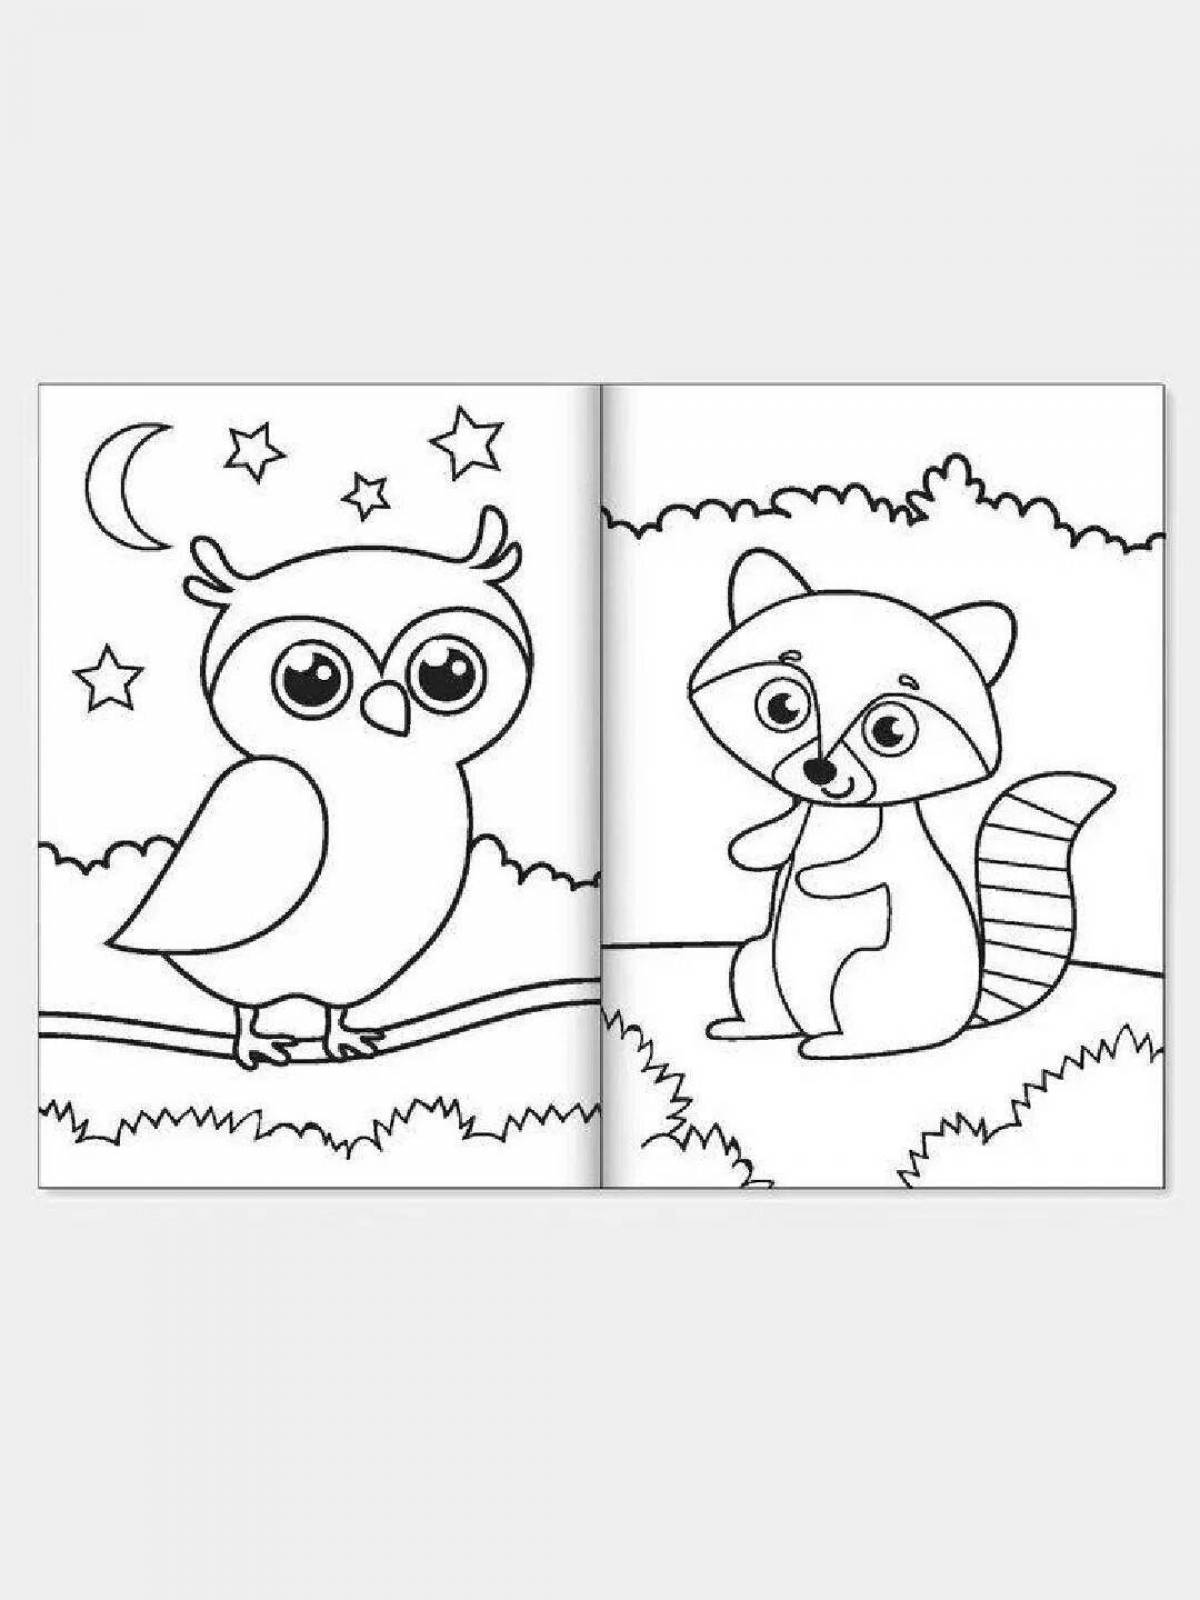 A5 glossy coloring book